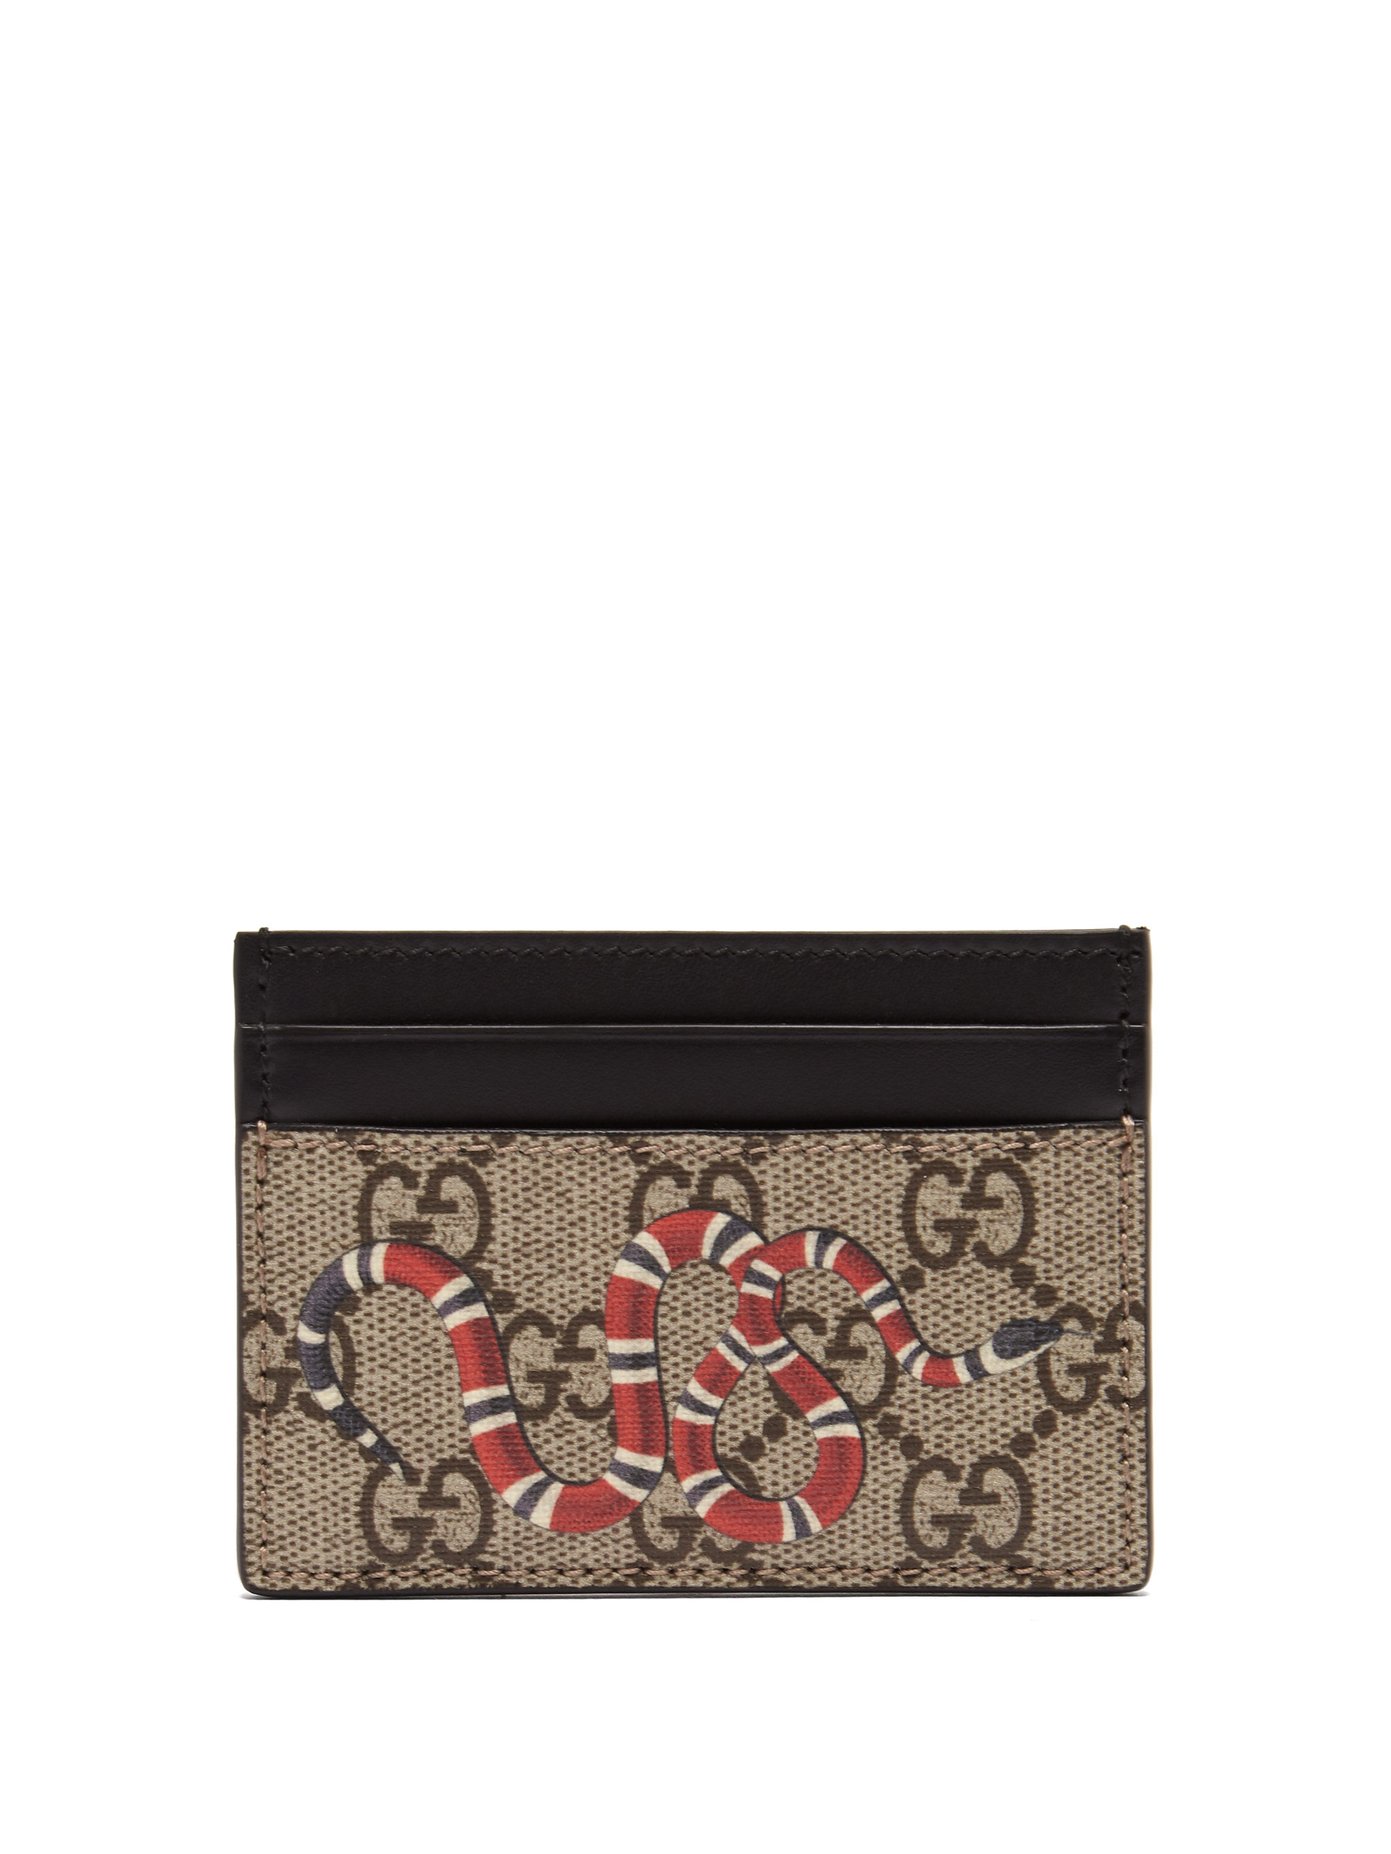 gucci card holder on sale